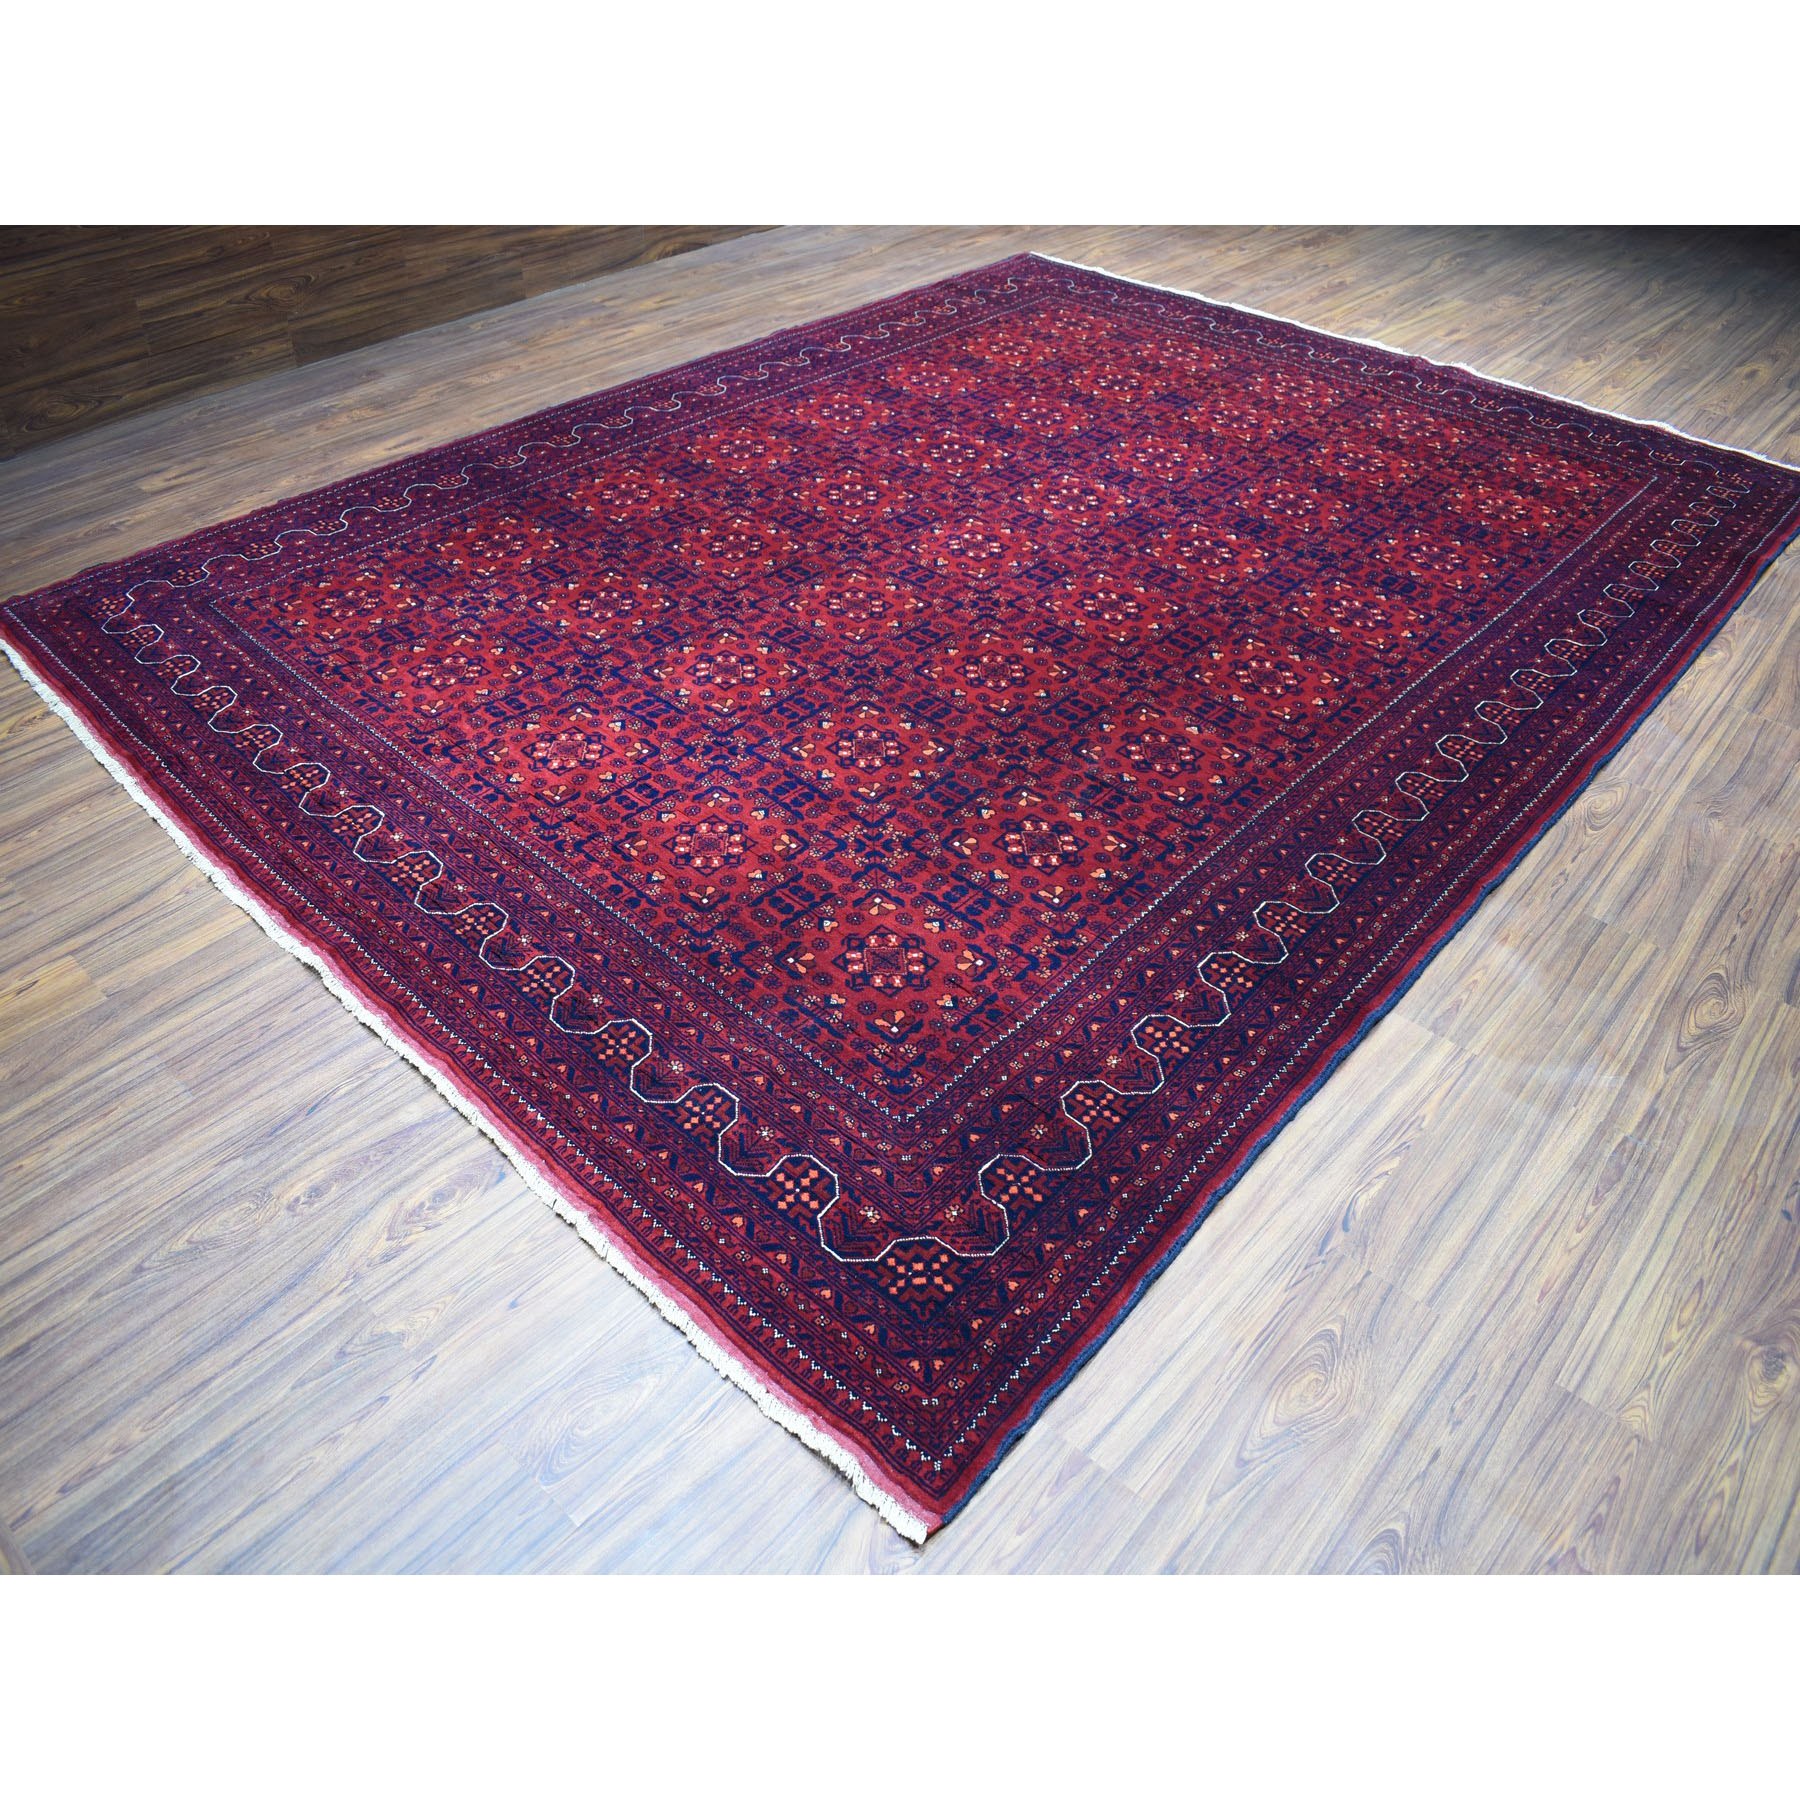 10-x13-1  Afghan Khamyab Natural Dyes Pure Wool Hand-Knotted Oriental Rug 